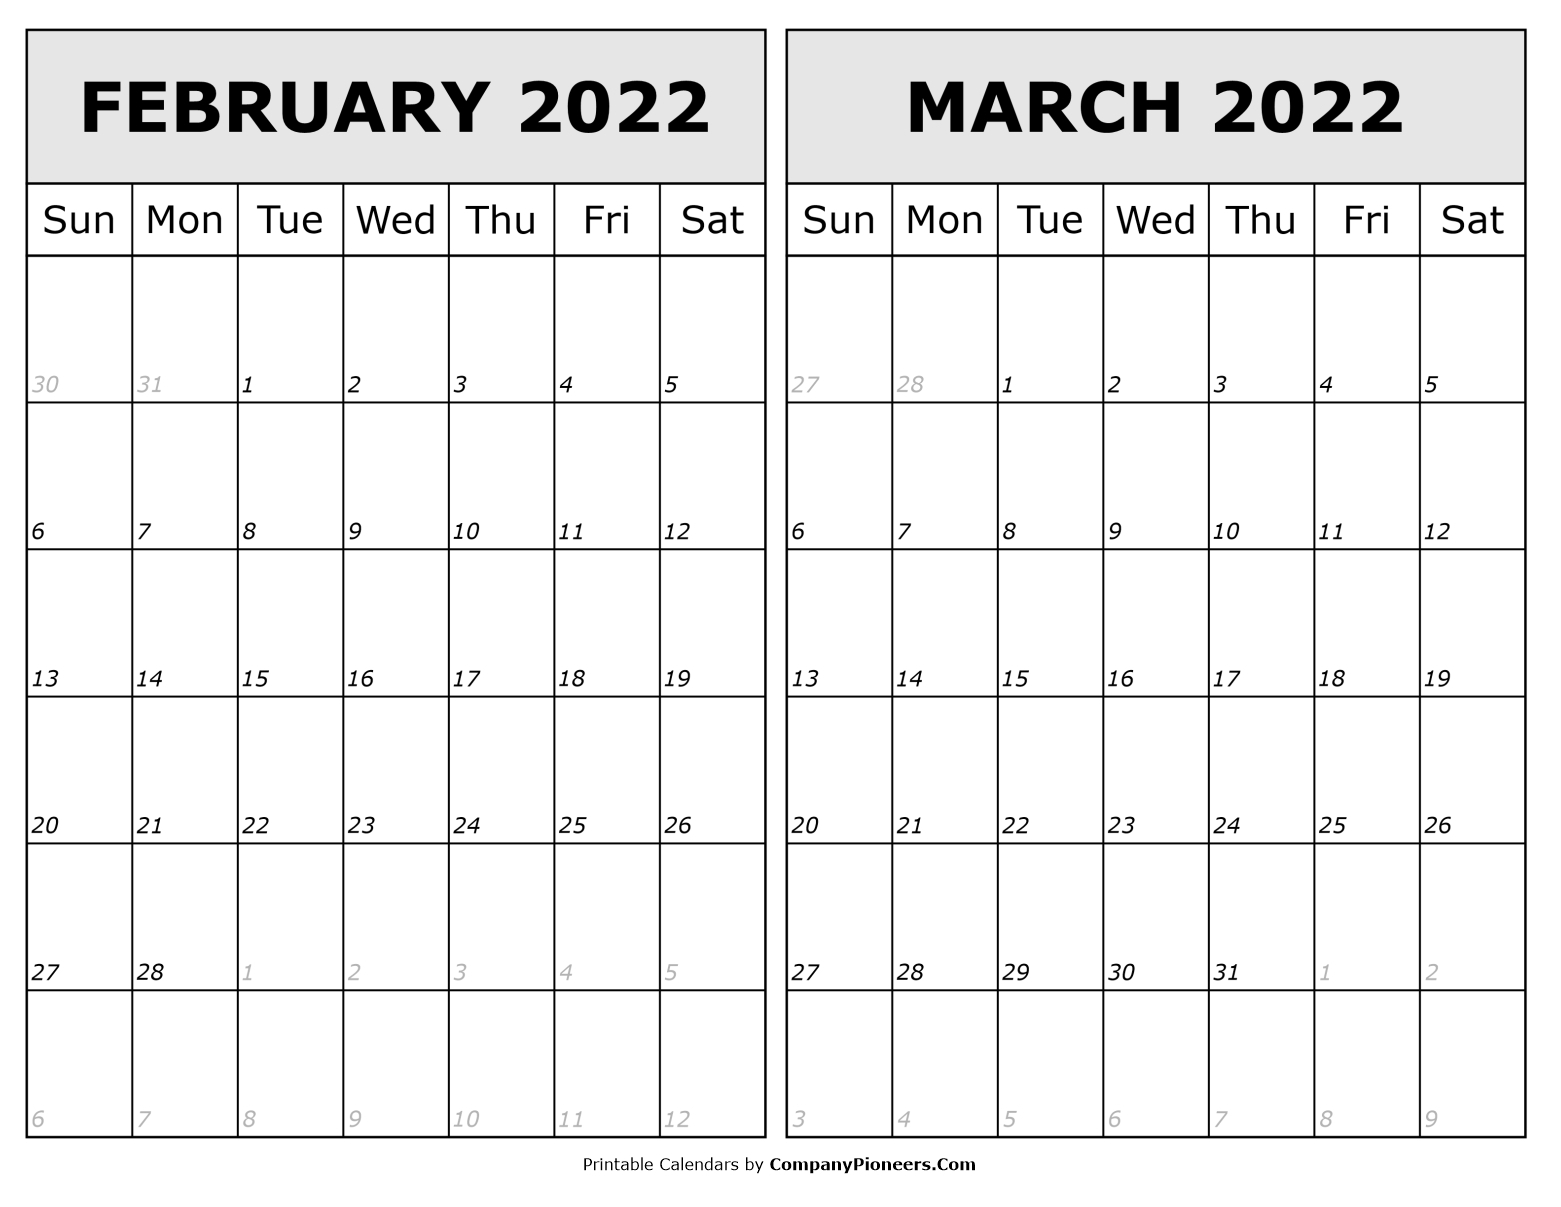 Take Calendar For February And March 2022